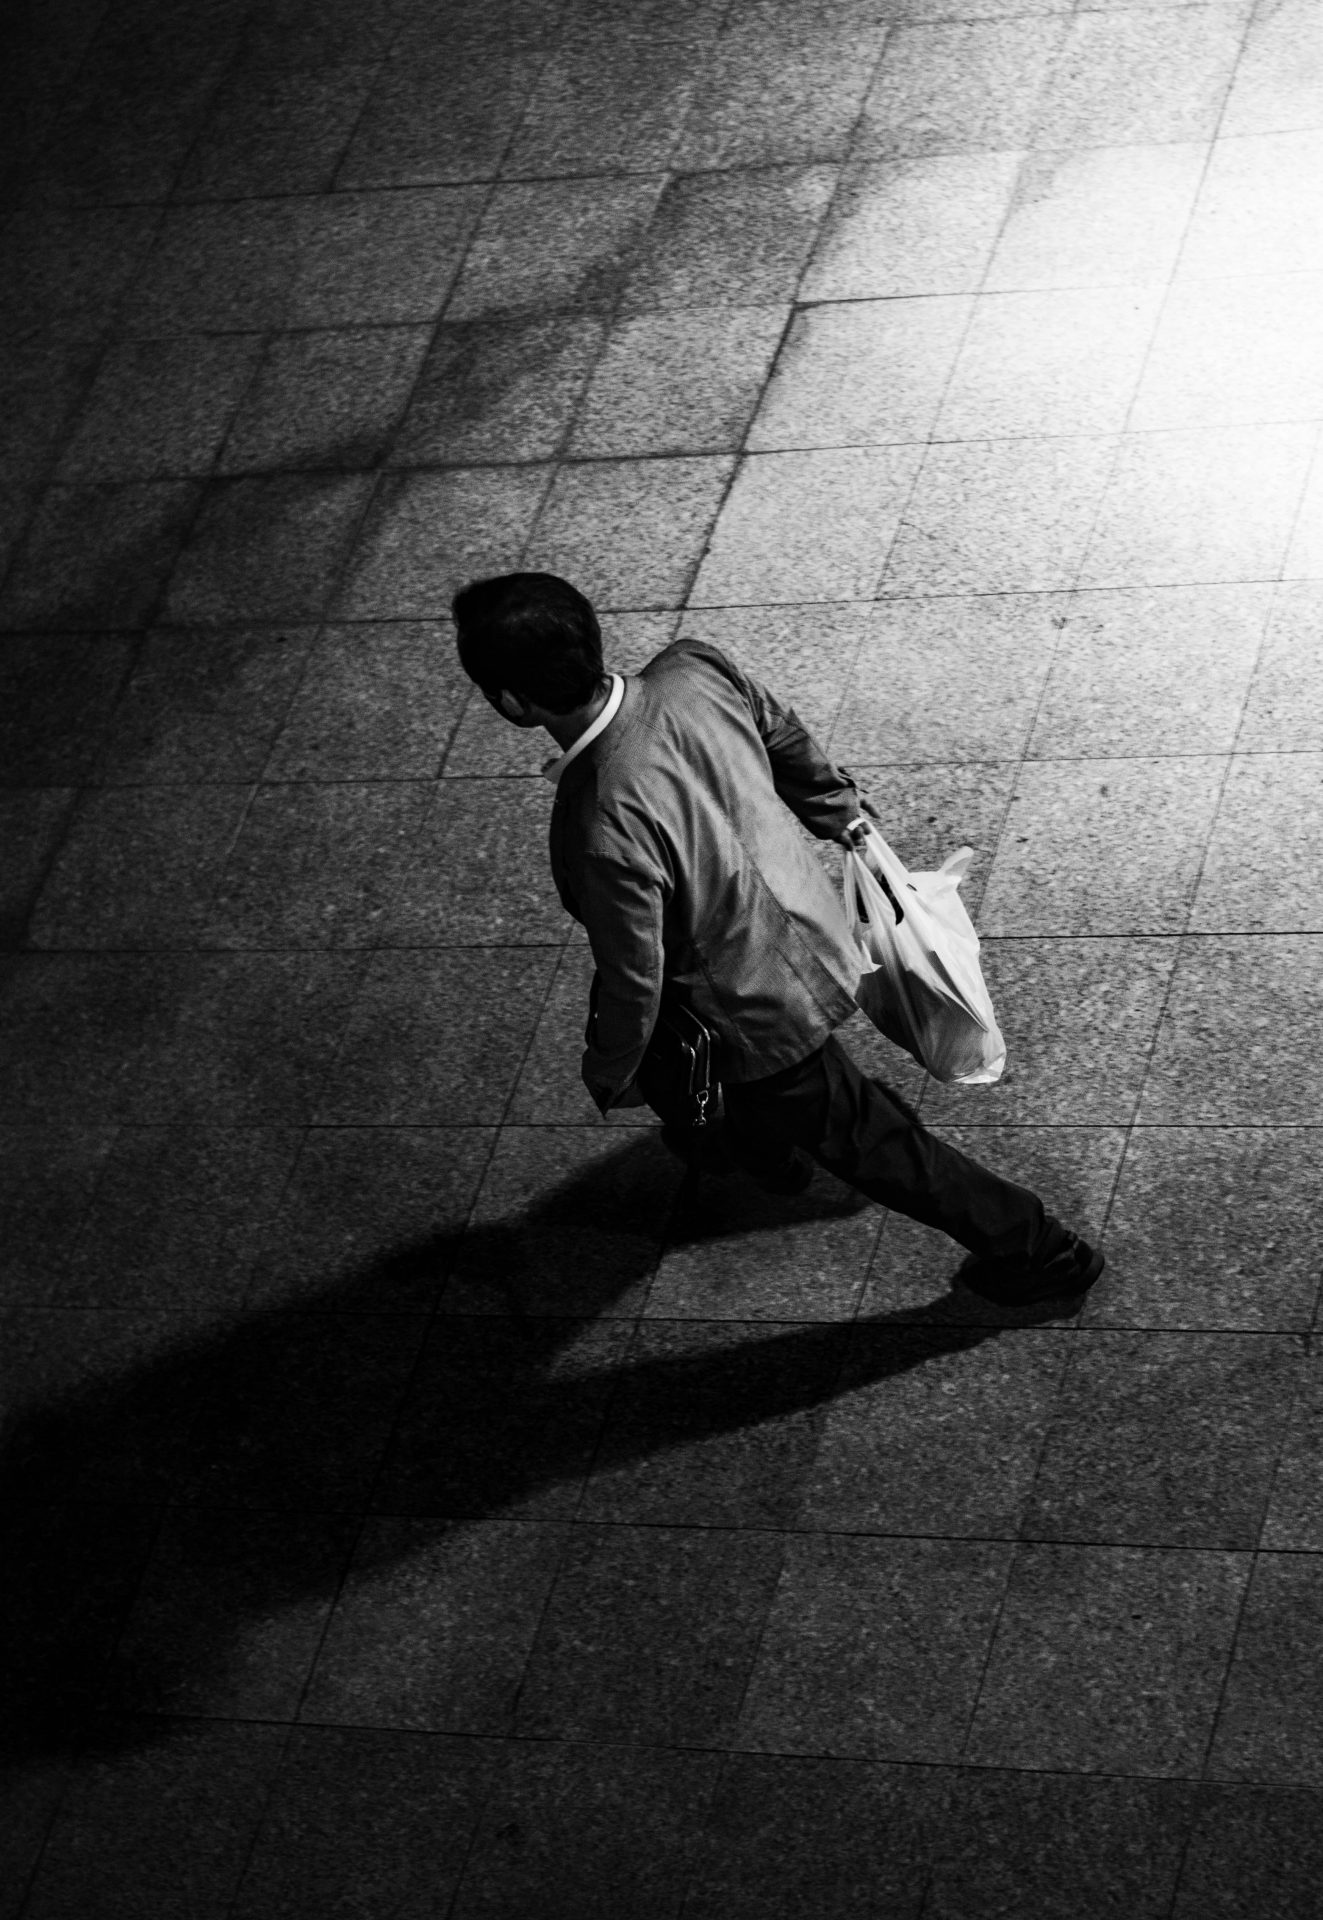 Minimalist black and white photography witha walking man and his shadow